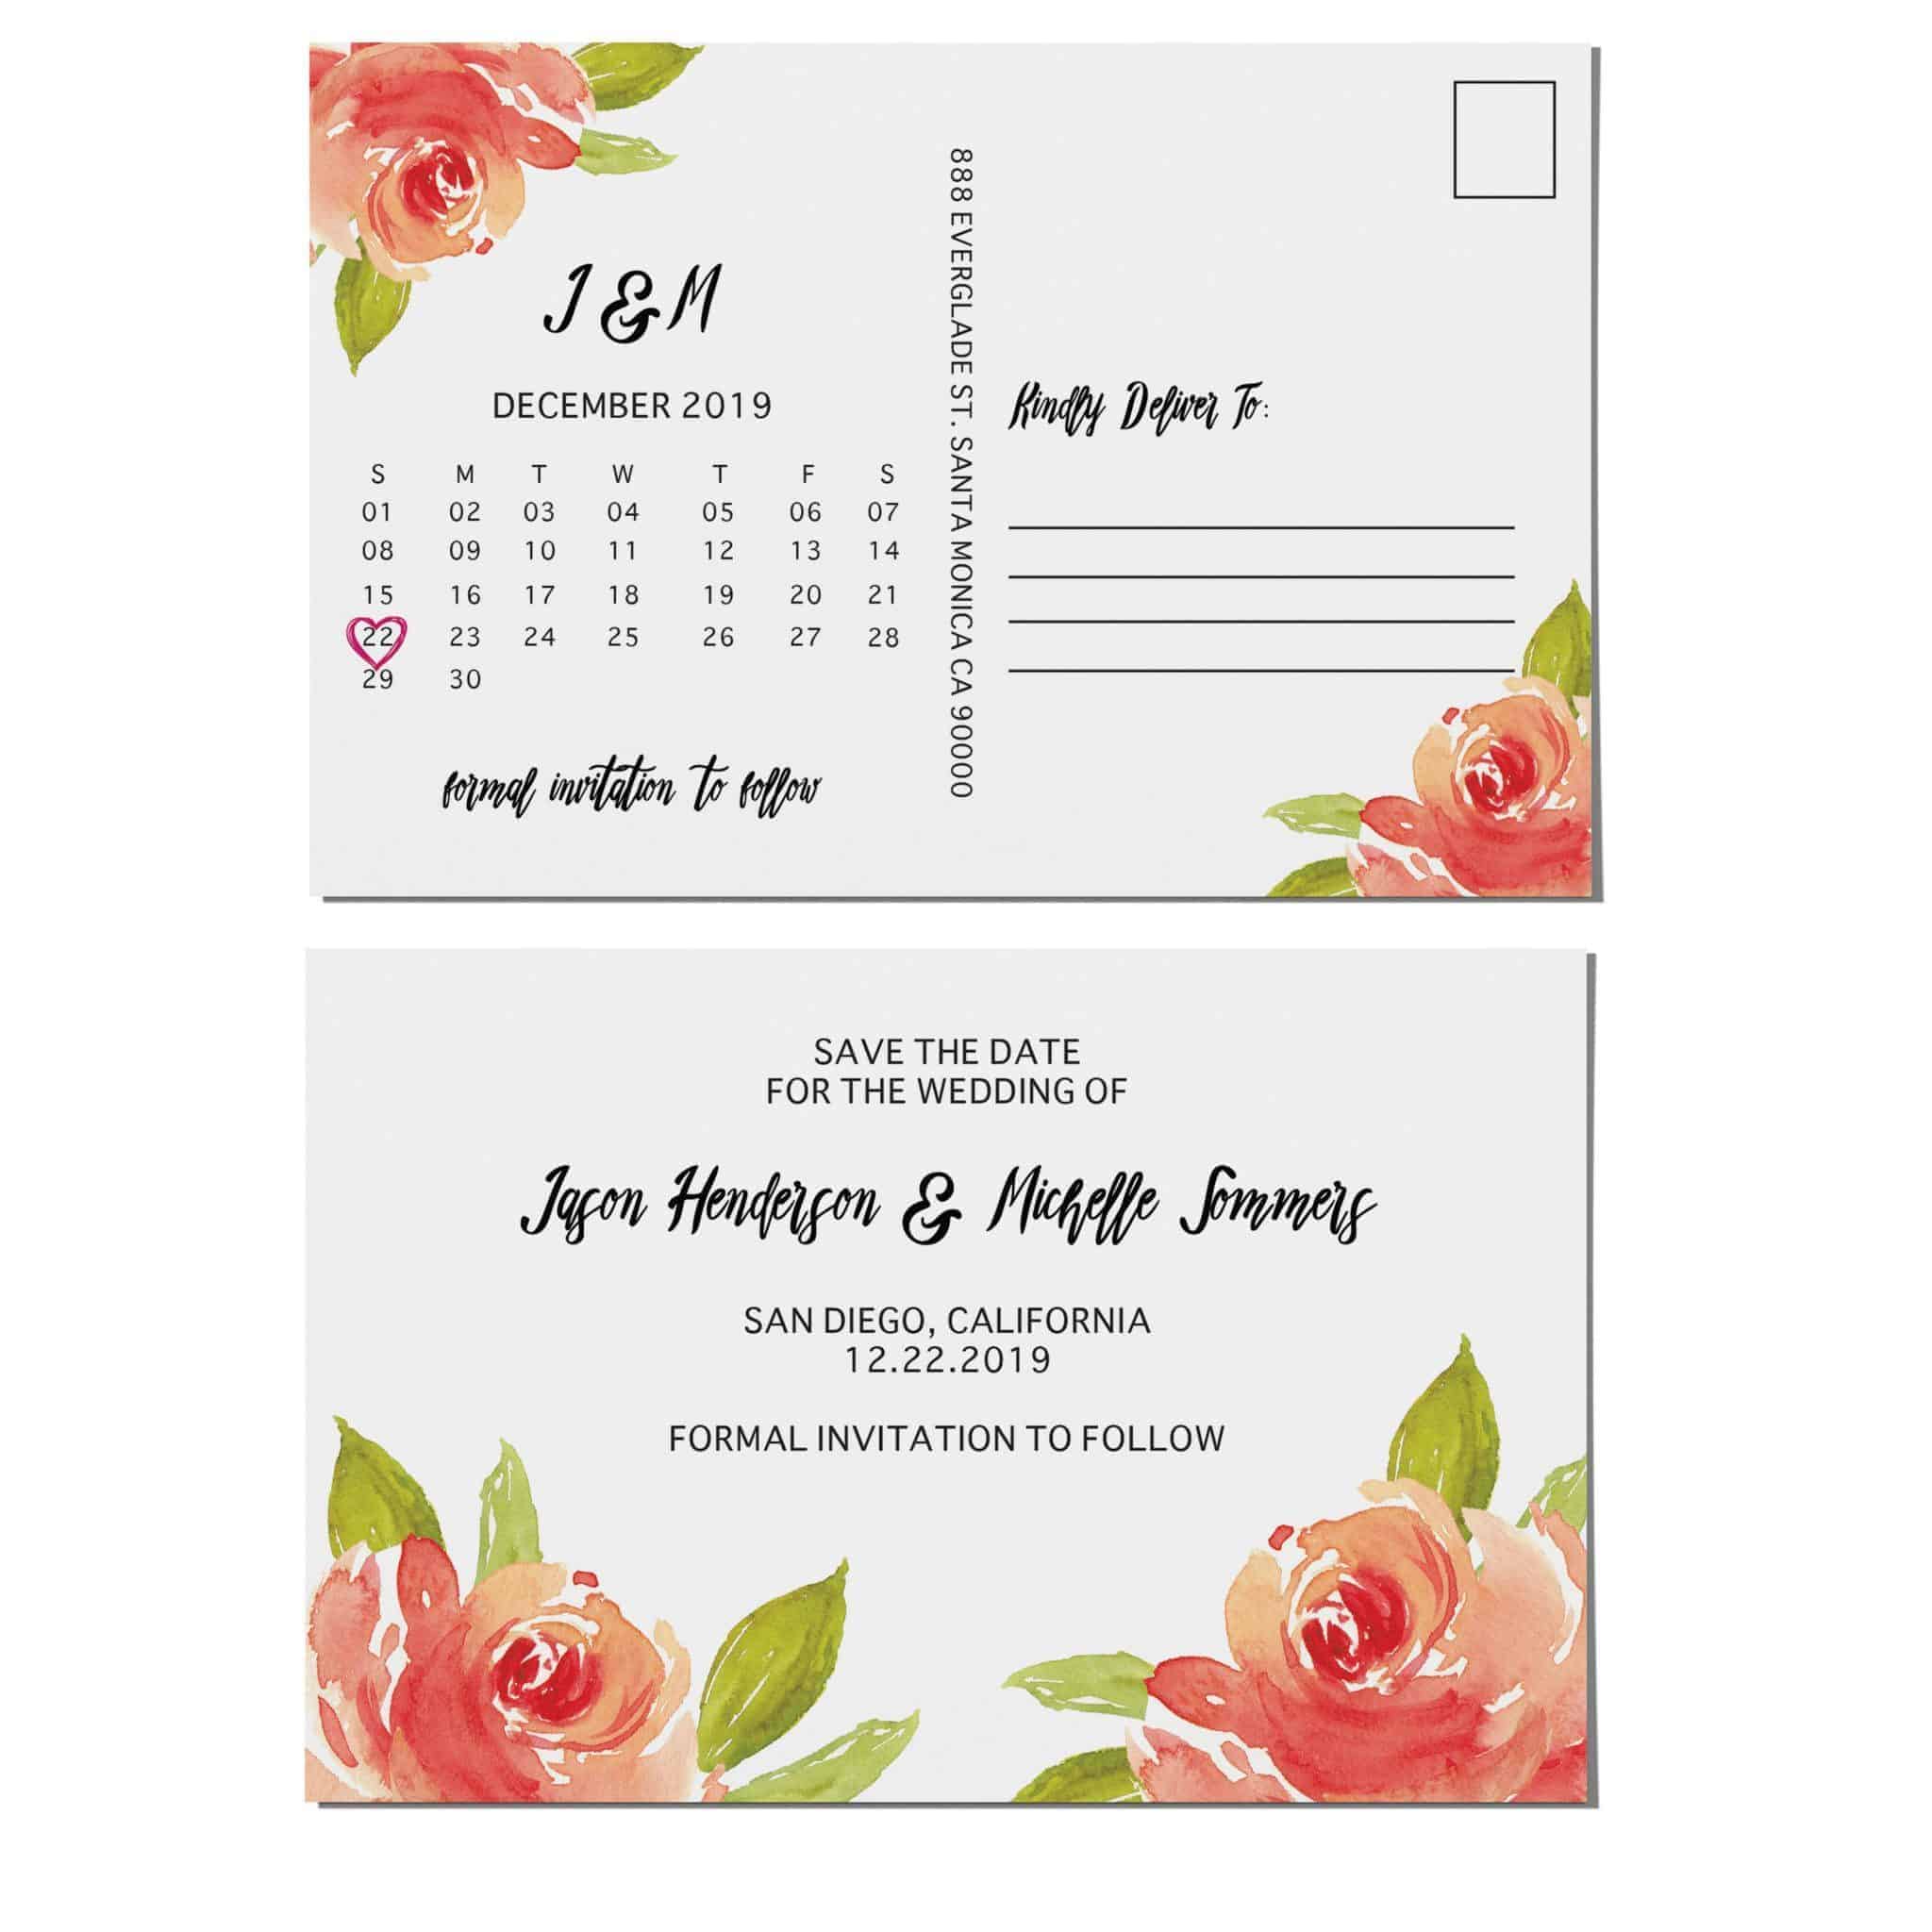 Wedding Save The Date Postcards For Weddings Invitation Card